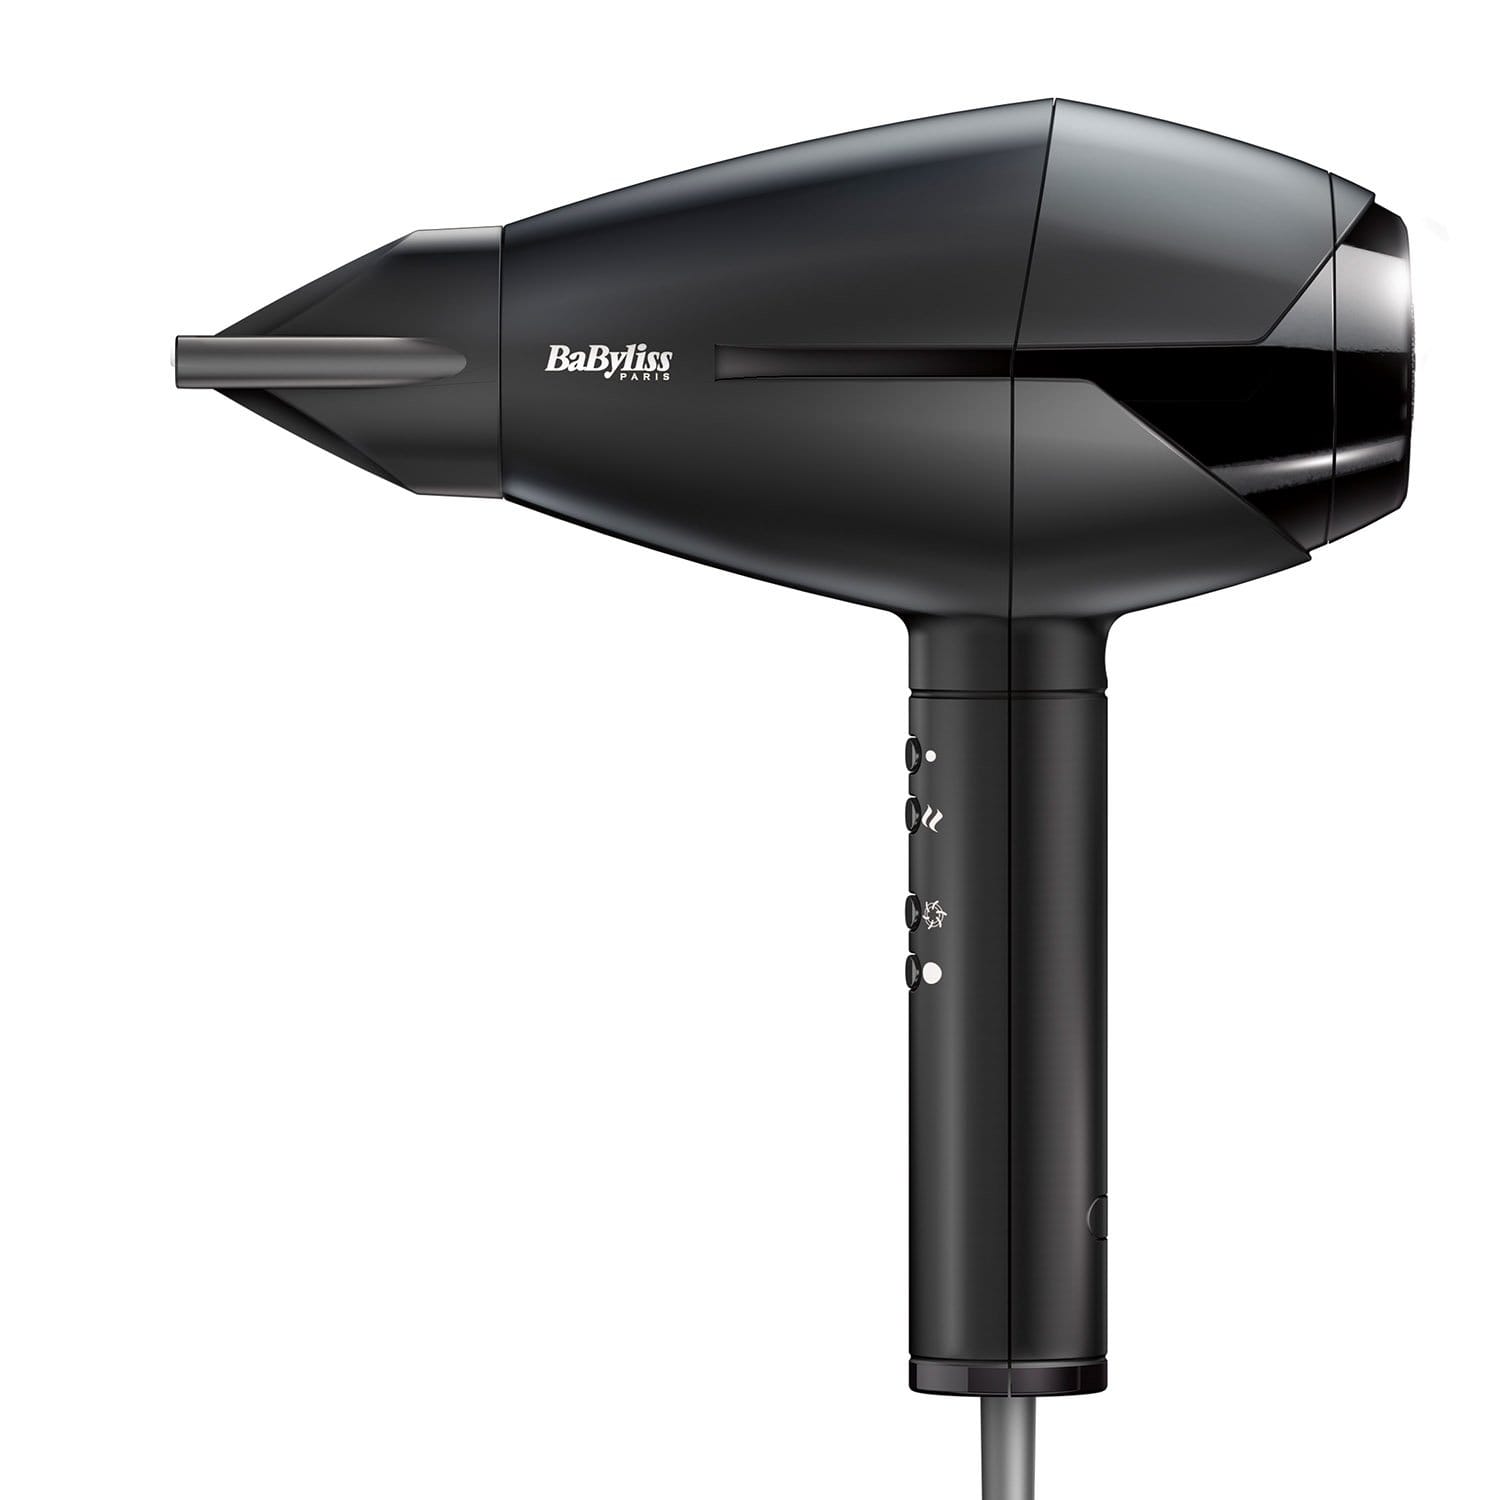 BABYLISS COMPACT AC DRYER 2300W BLACK WITH DIFFUSER MADE IN ITALY - 6720SDE